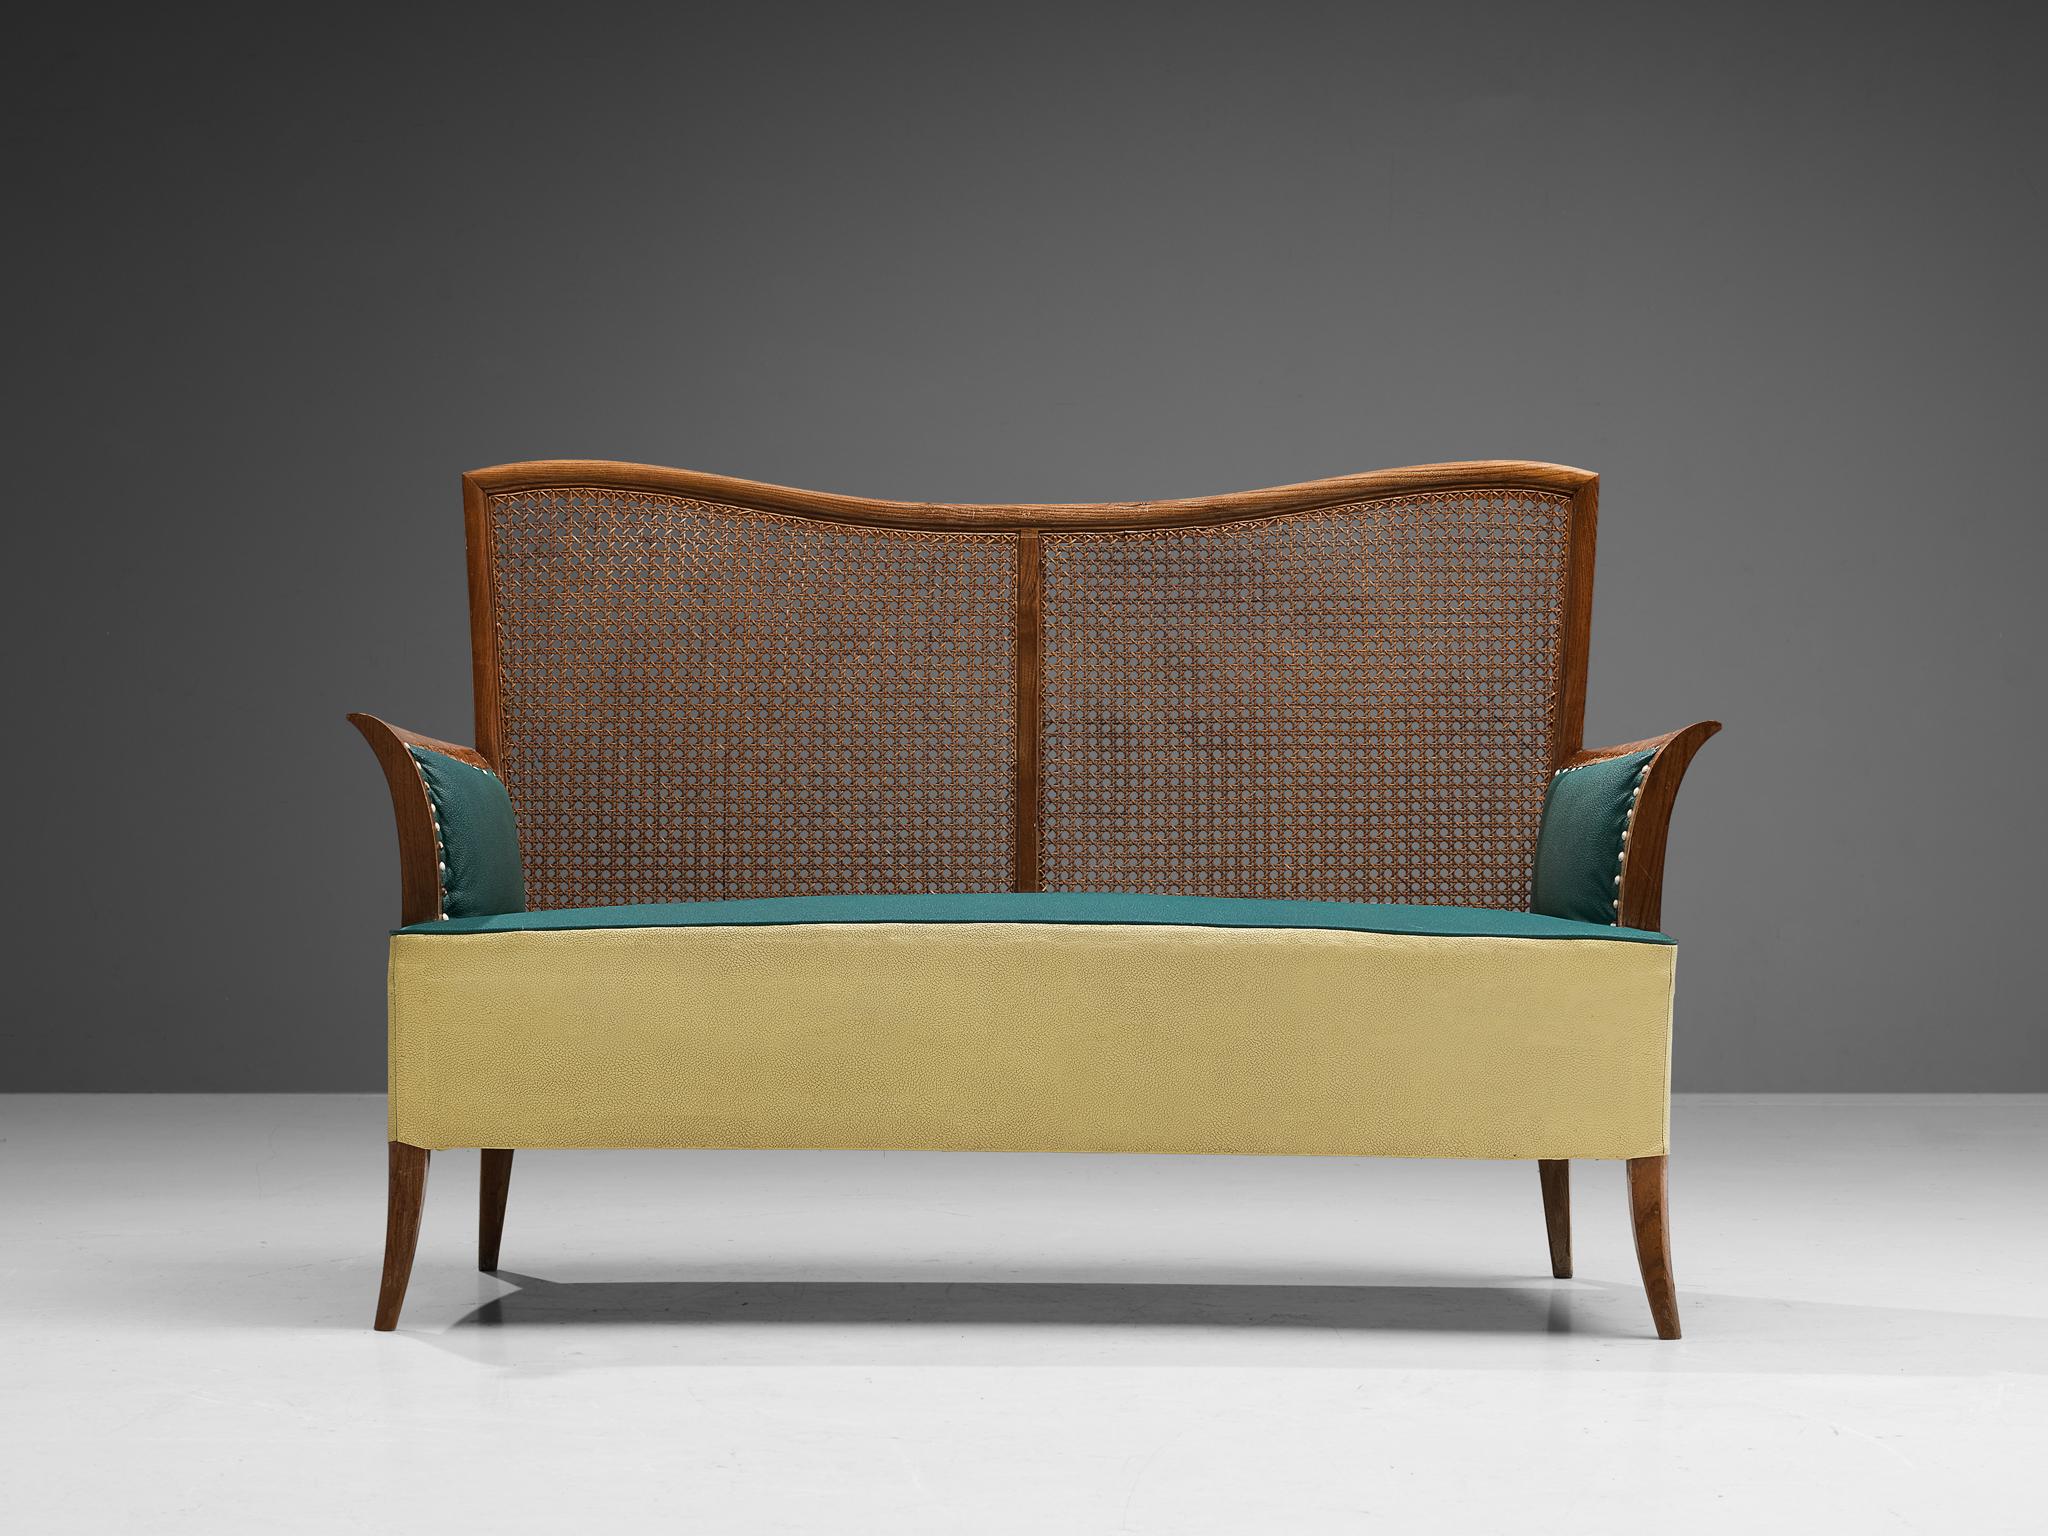 Settee, ash, cane, leatherette, metal, Spain, 1950s. 

Joyful Spanish two-seater sofa with soft organic lines. This settee features a stained ash frame of which a dynamic grain pattern comes through. The backrest is made of woven cane that shows a